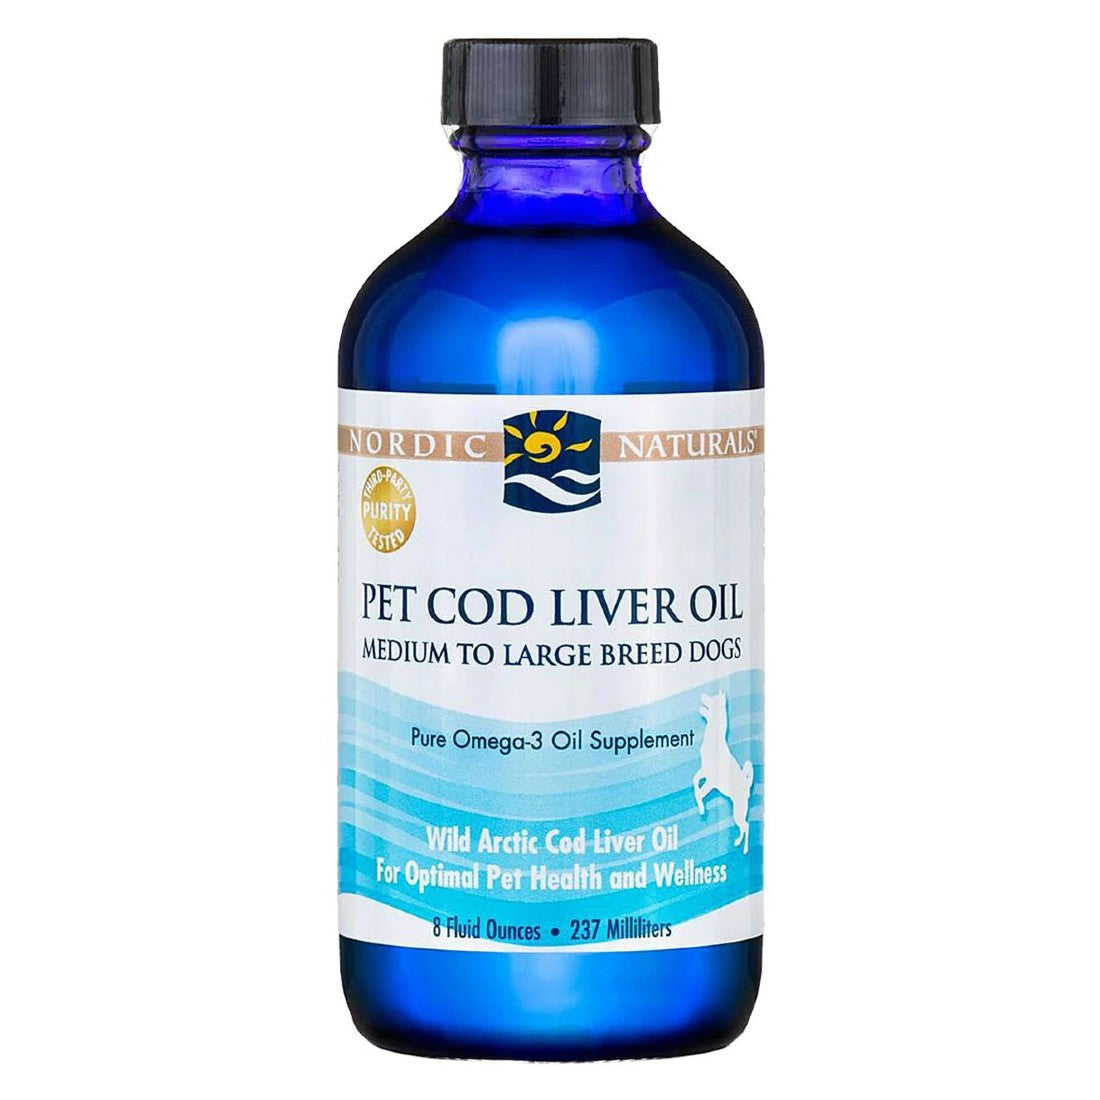 Pet Cod Liver Oil for Medium to Large Breed Dogs - My Village Green